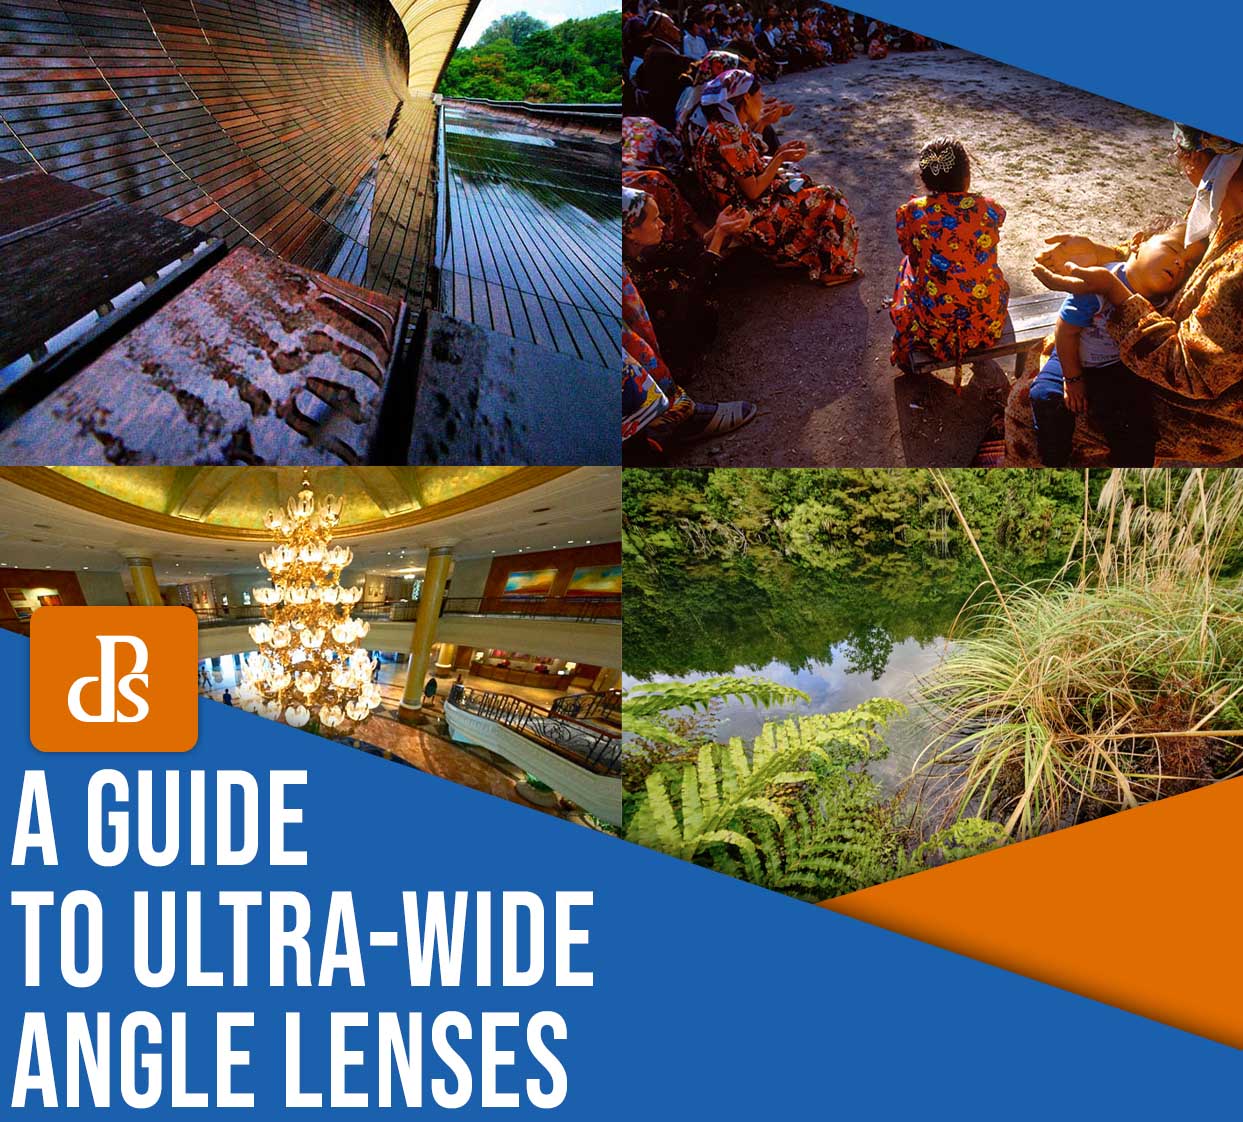 a guide to ultra-wide angle lenses